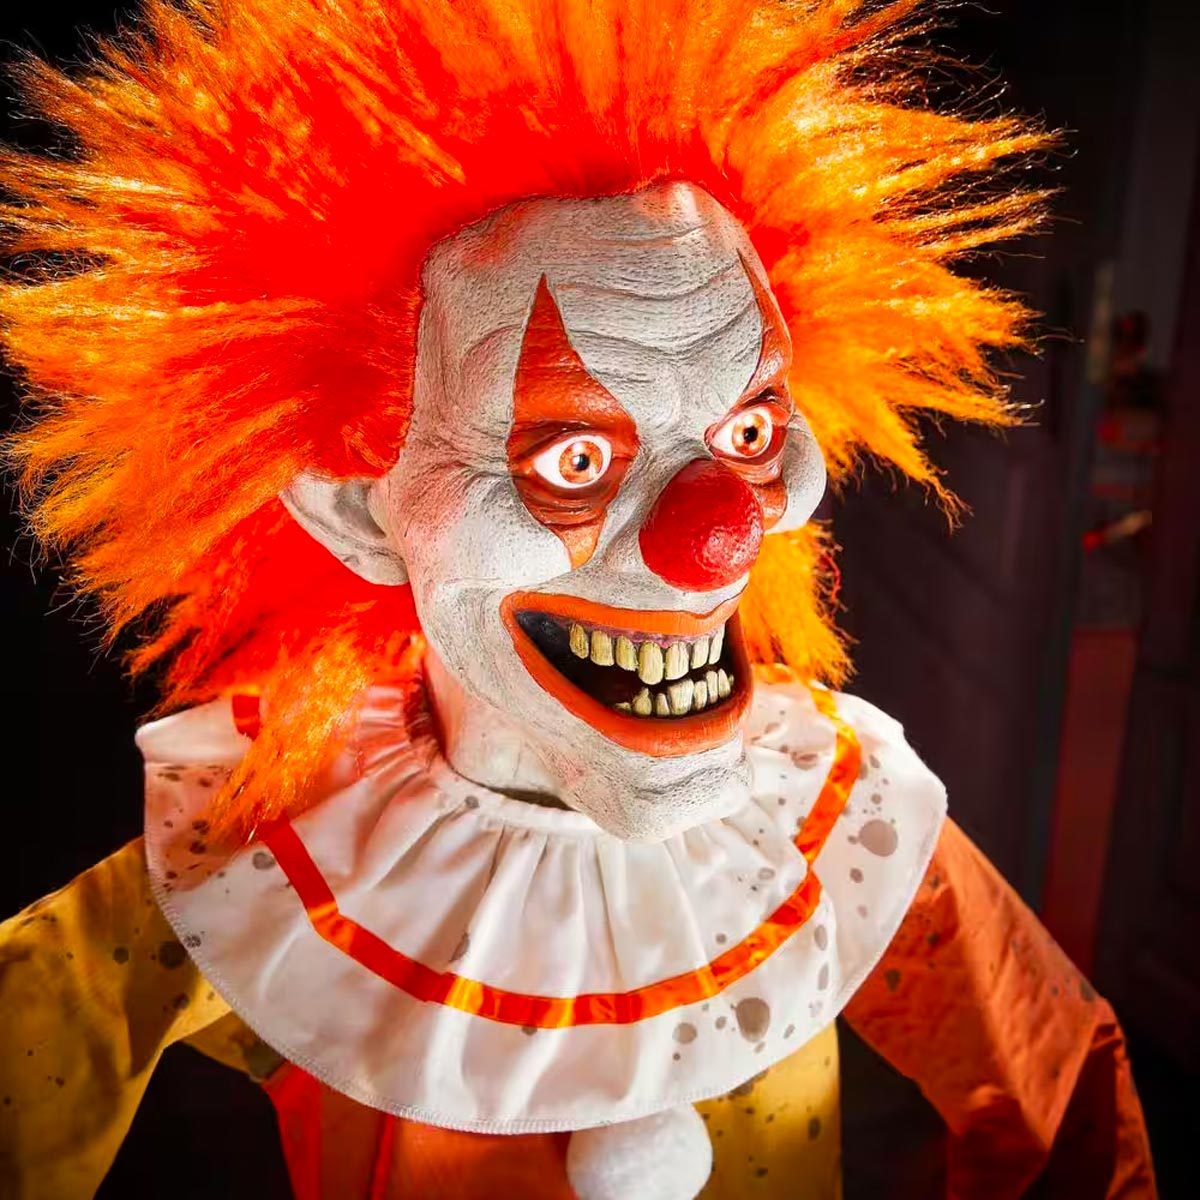 The Home Depot Is Selling an Evil Clown Handyman Decoration for Halloween